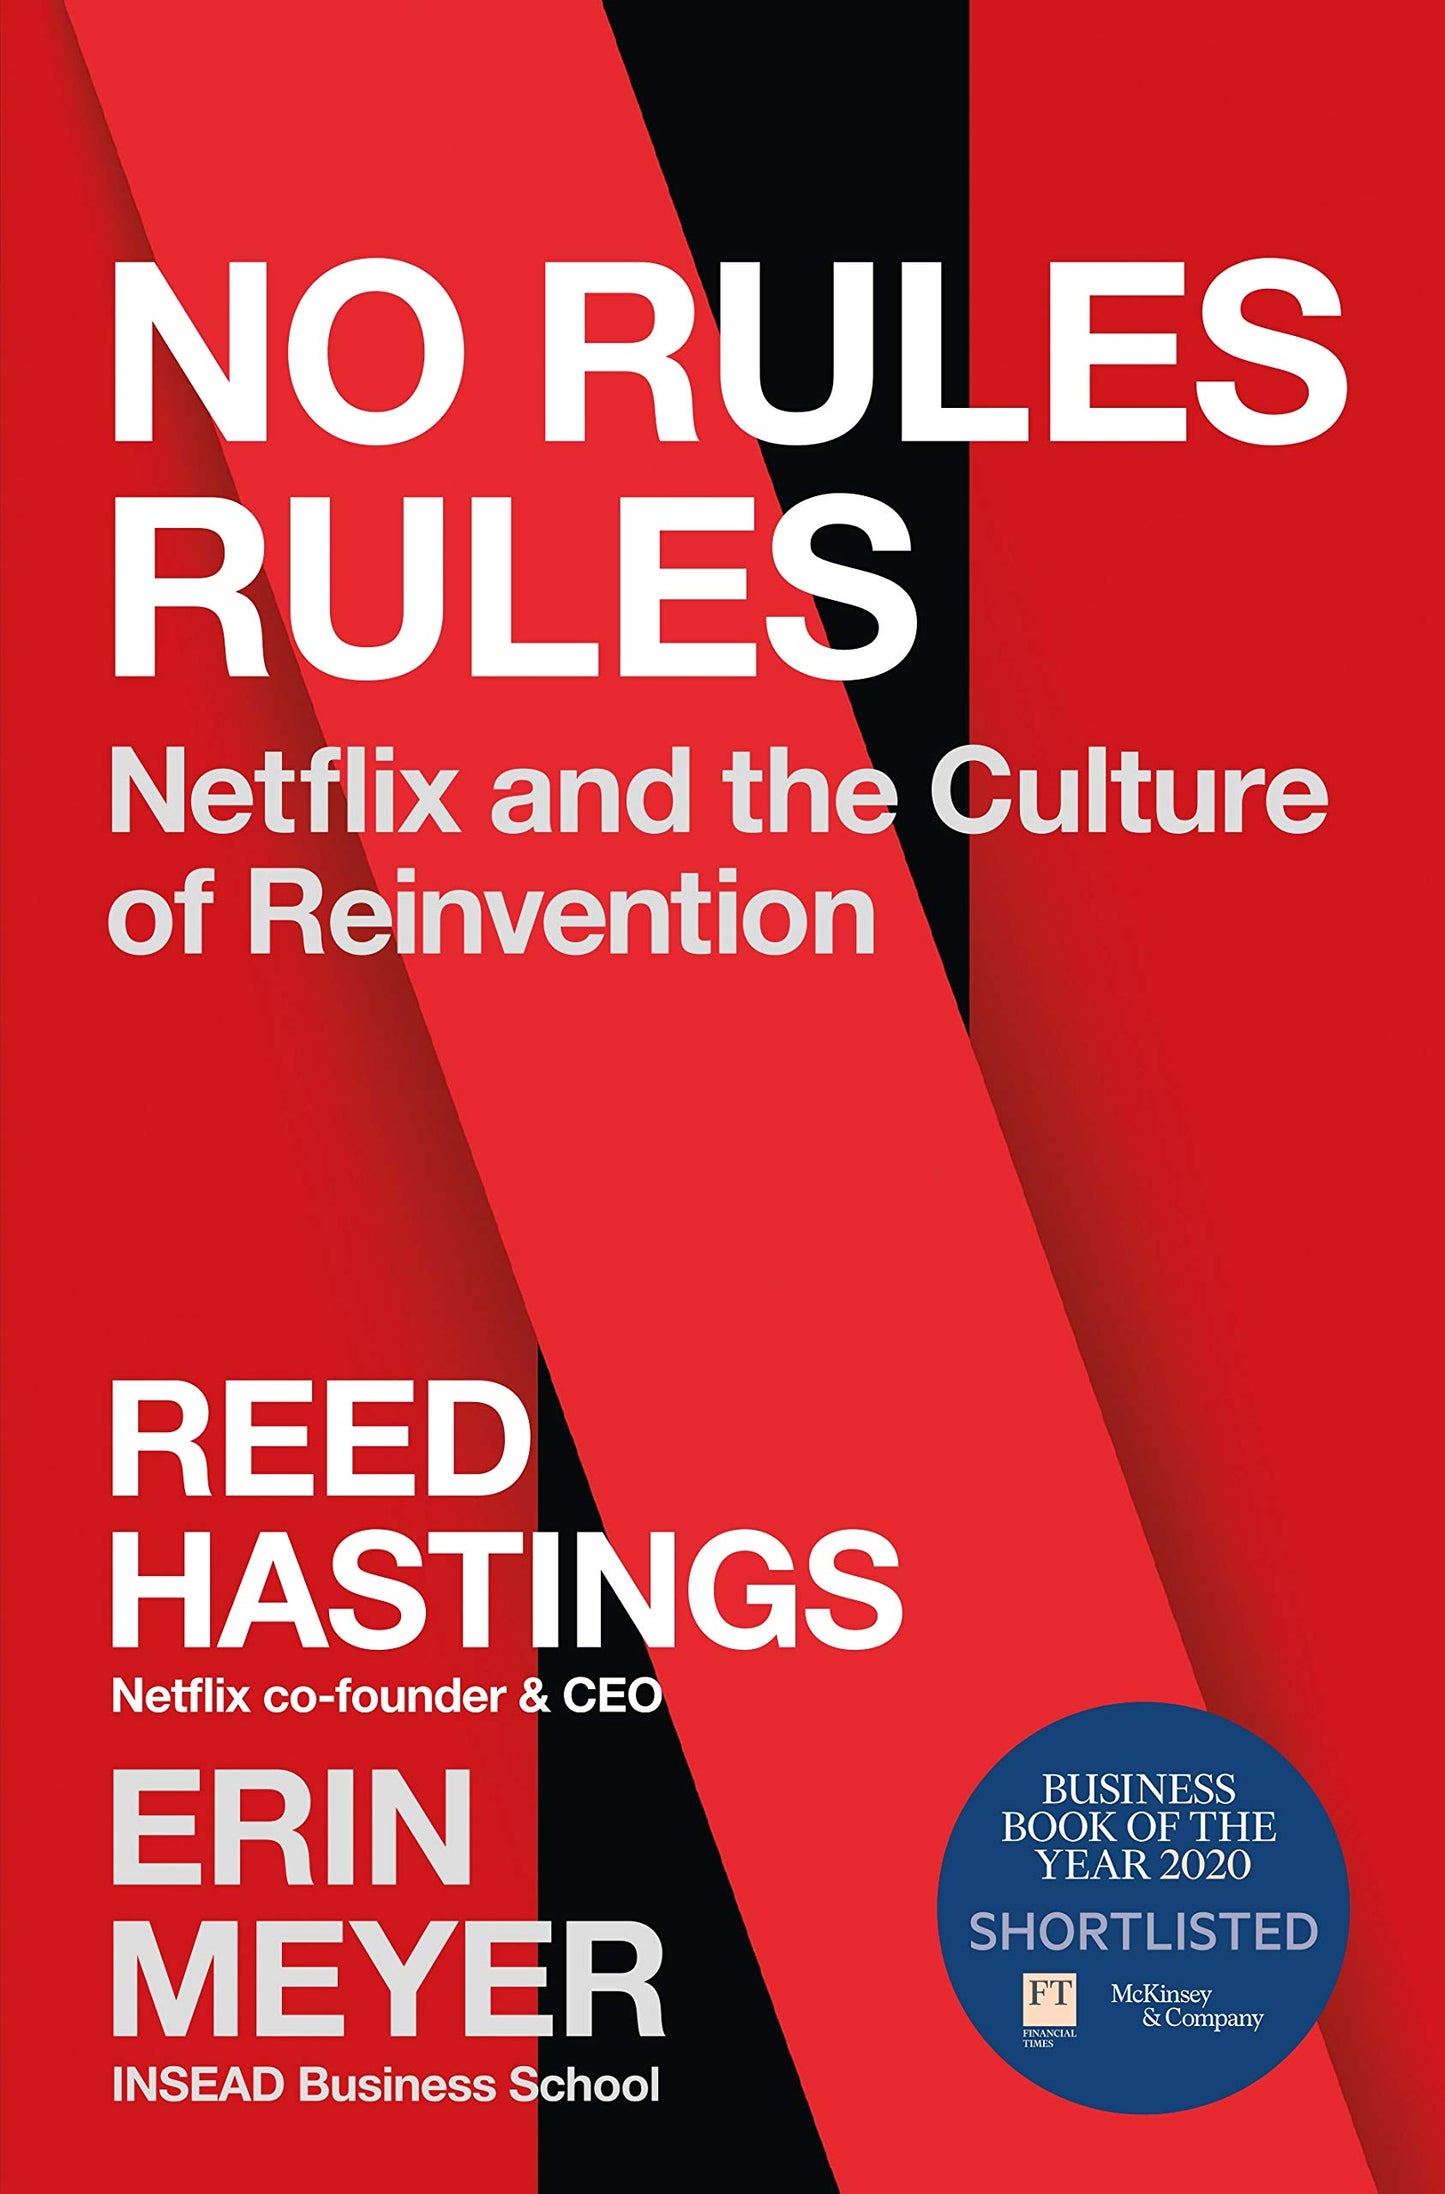 NO RULES RULES by REED HASTINGS